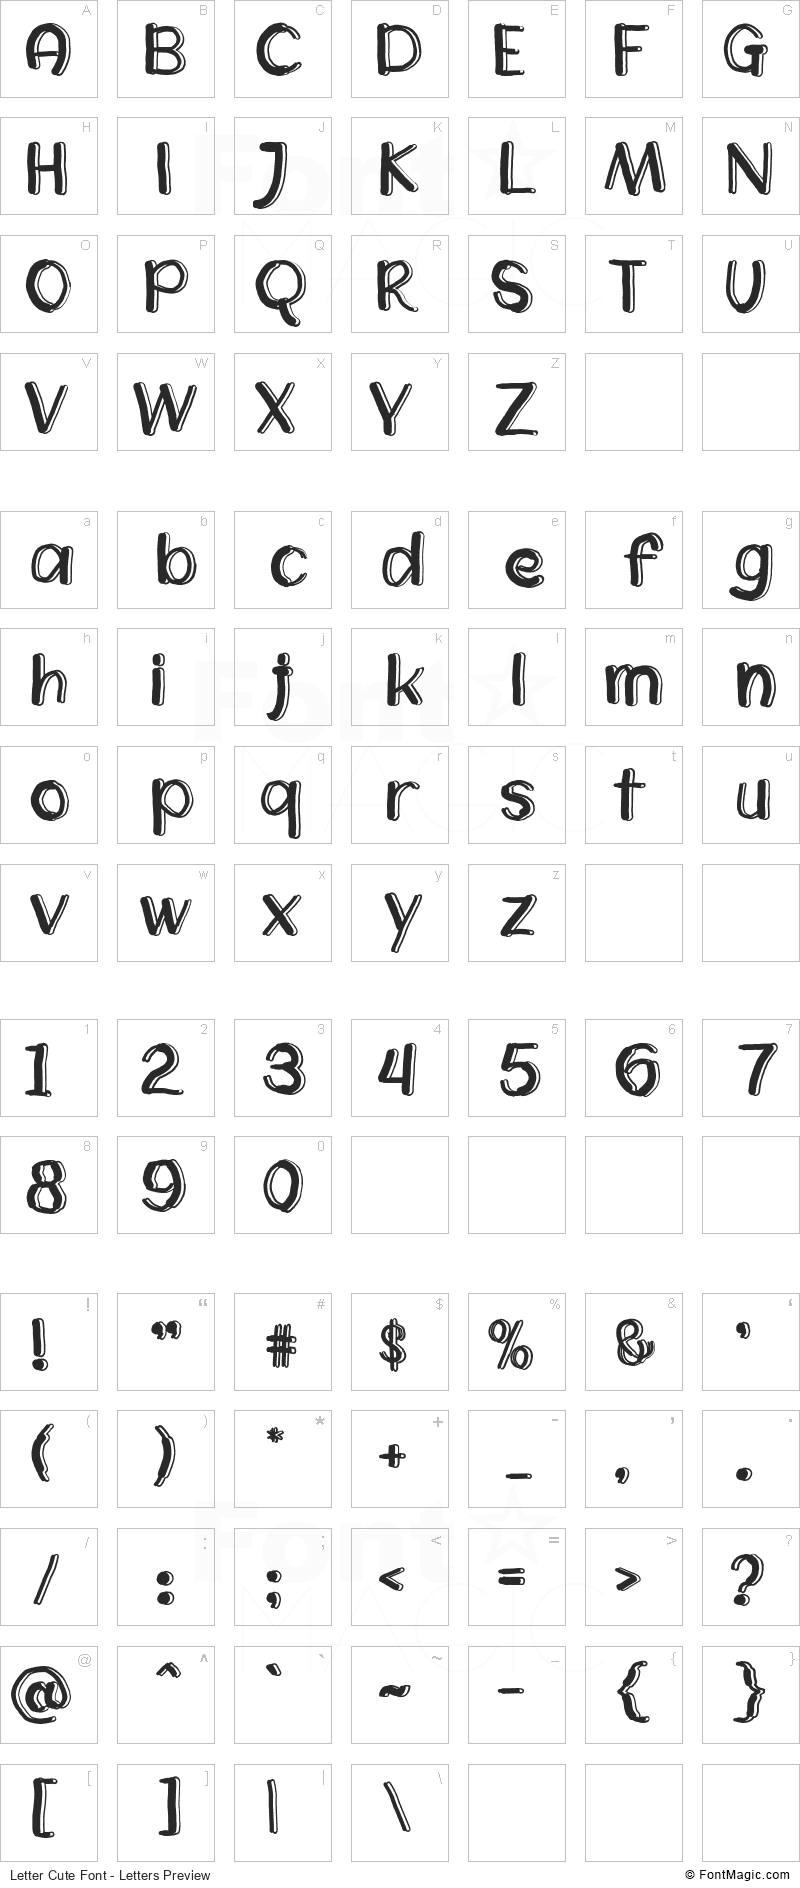 Letter Cute Font - All Latters Preview Chart